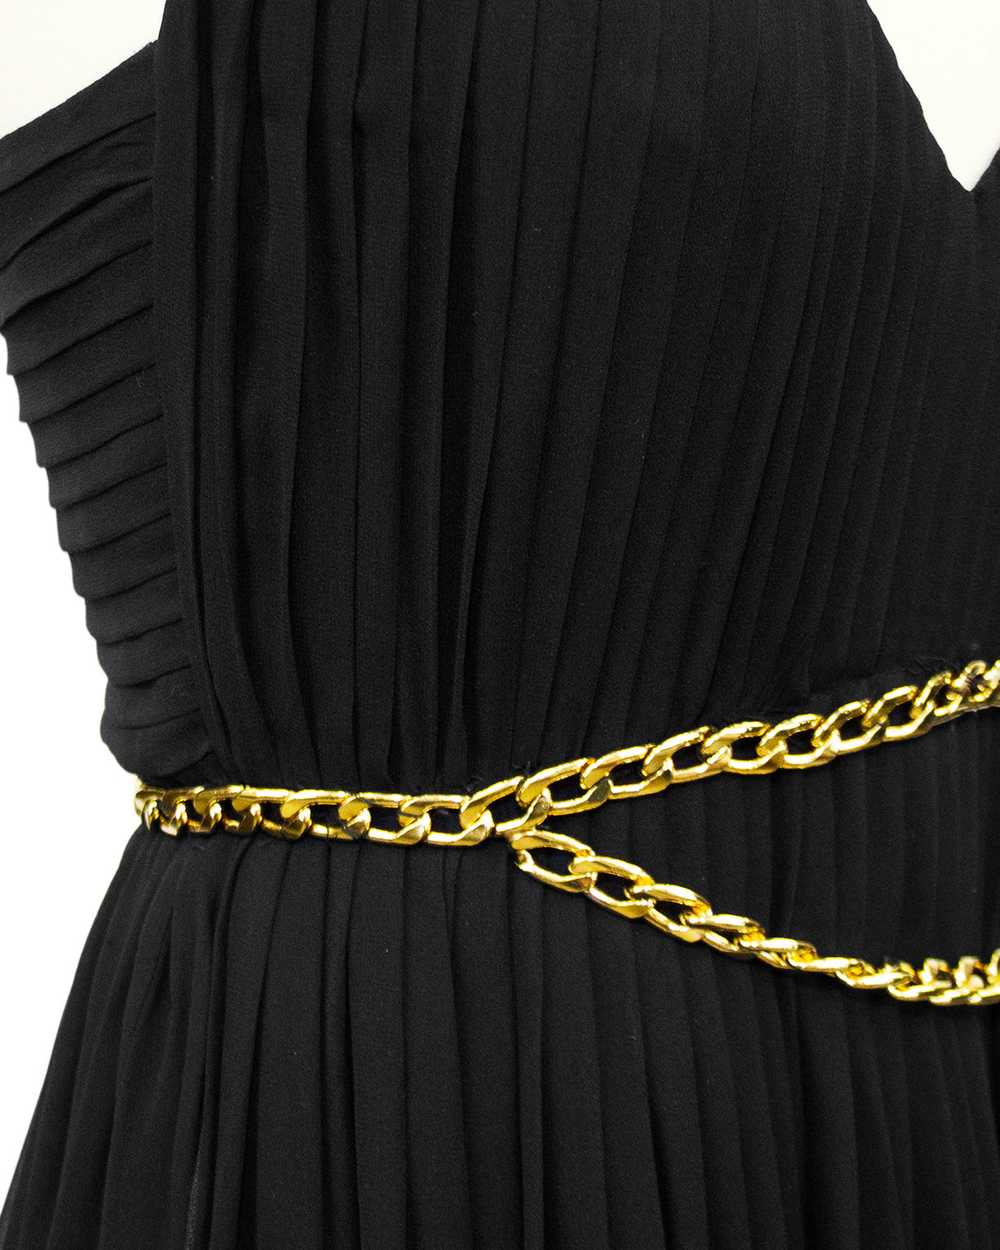 Chanel Black Chiffon Gown with Gold Chain Belt - image 9